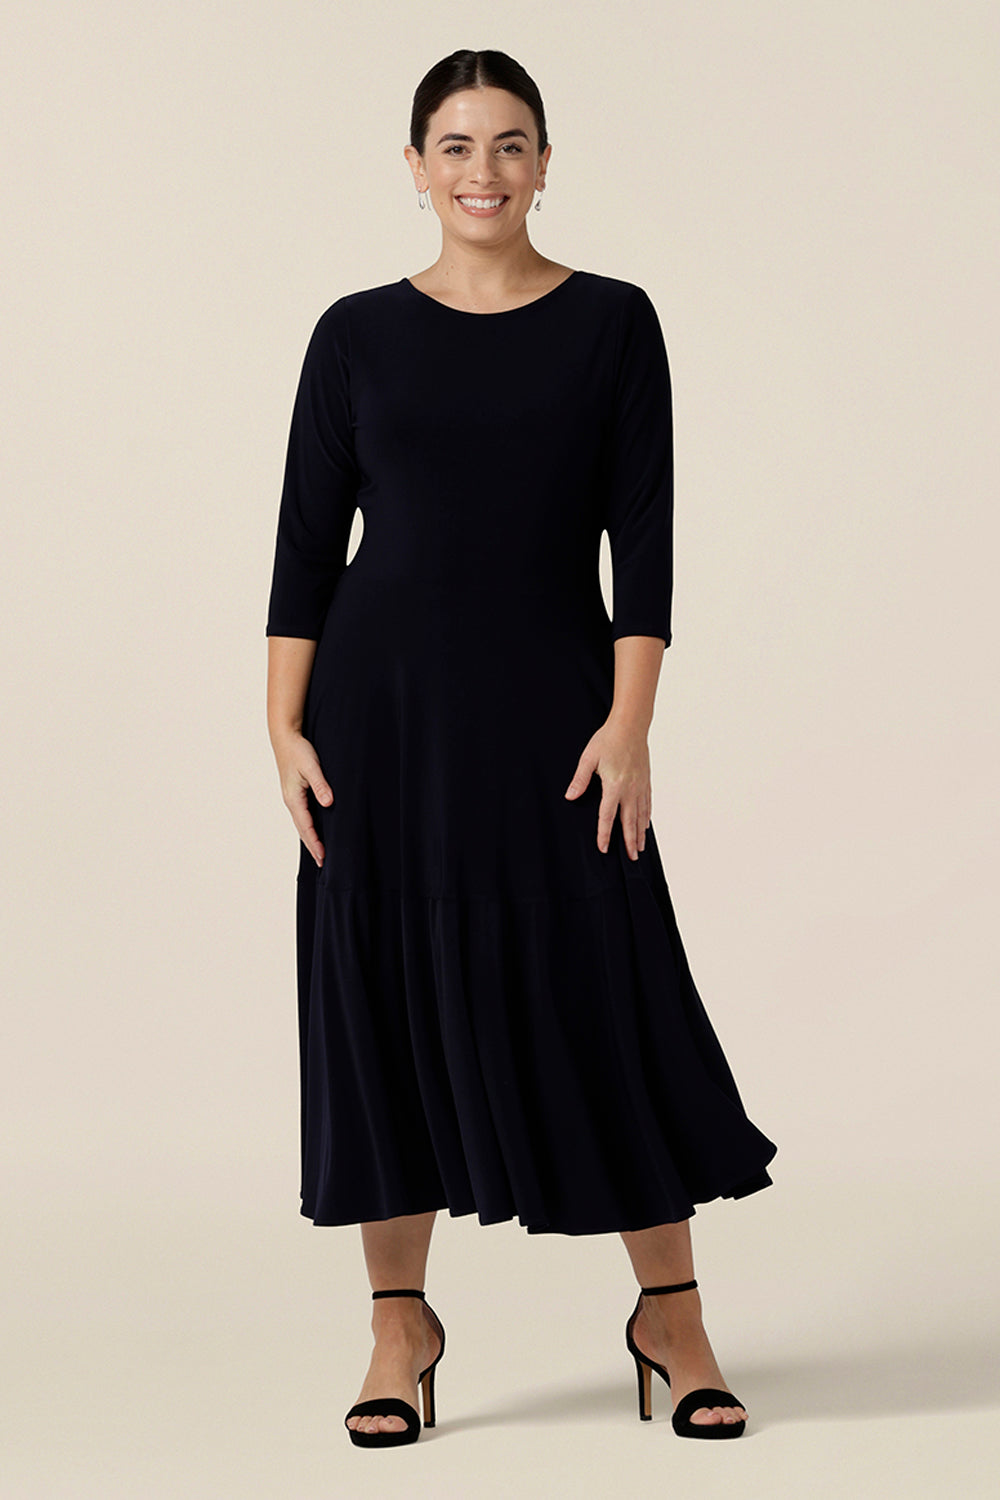 A petite-height, 3/4 sleeve reversible wrap dress in navy jersey worn with a boat neck. Made in Australia by Australian and New Zealand women's clothing label, L&F and available in sizes 8 to 24.